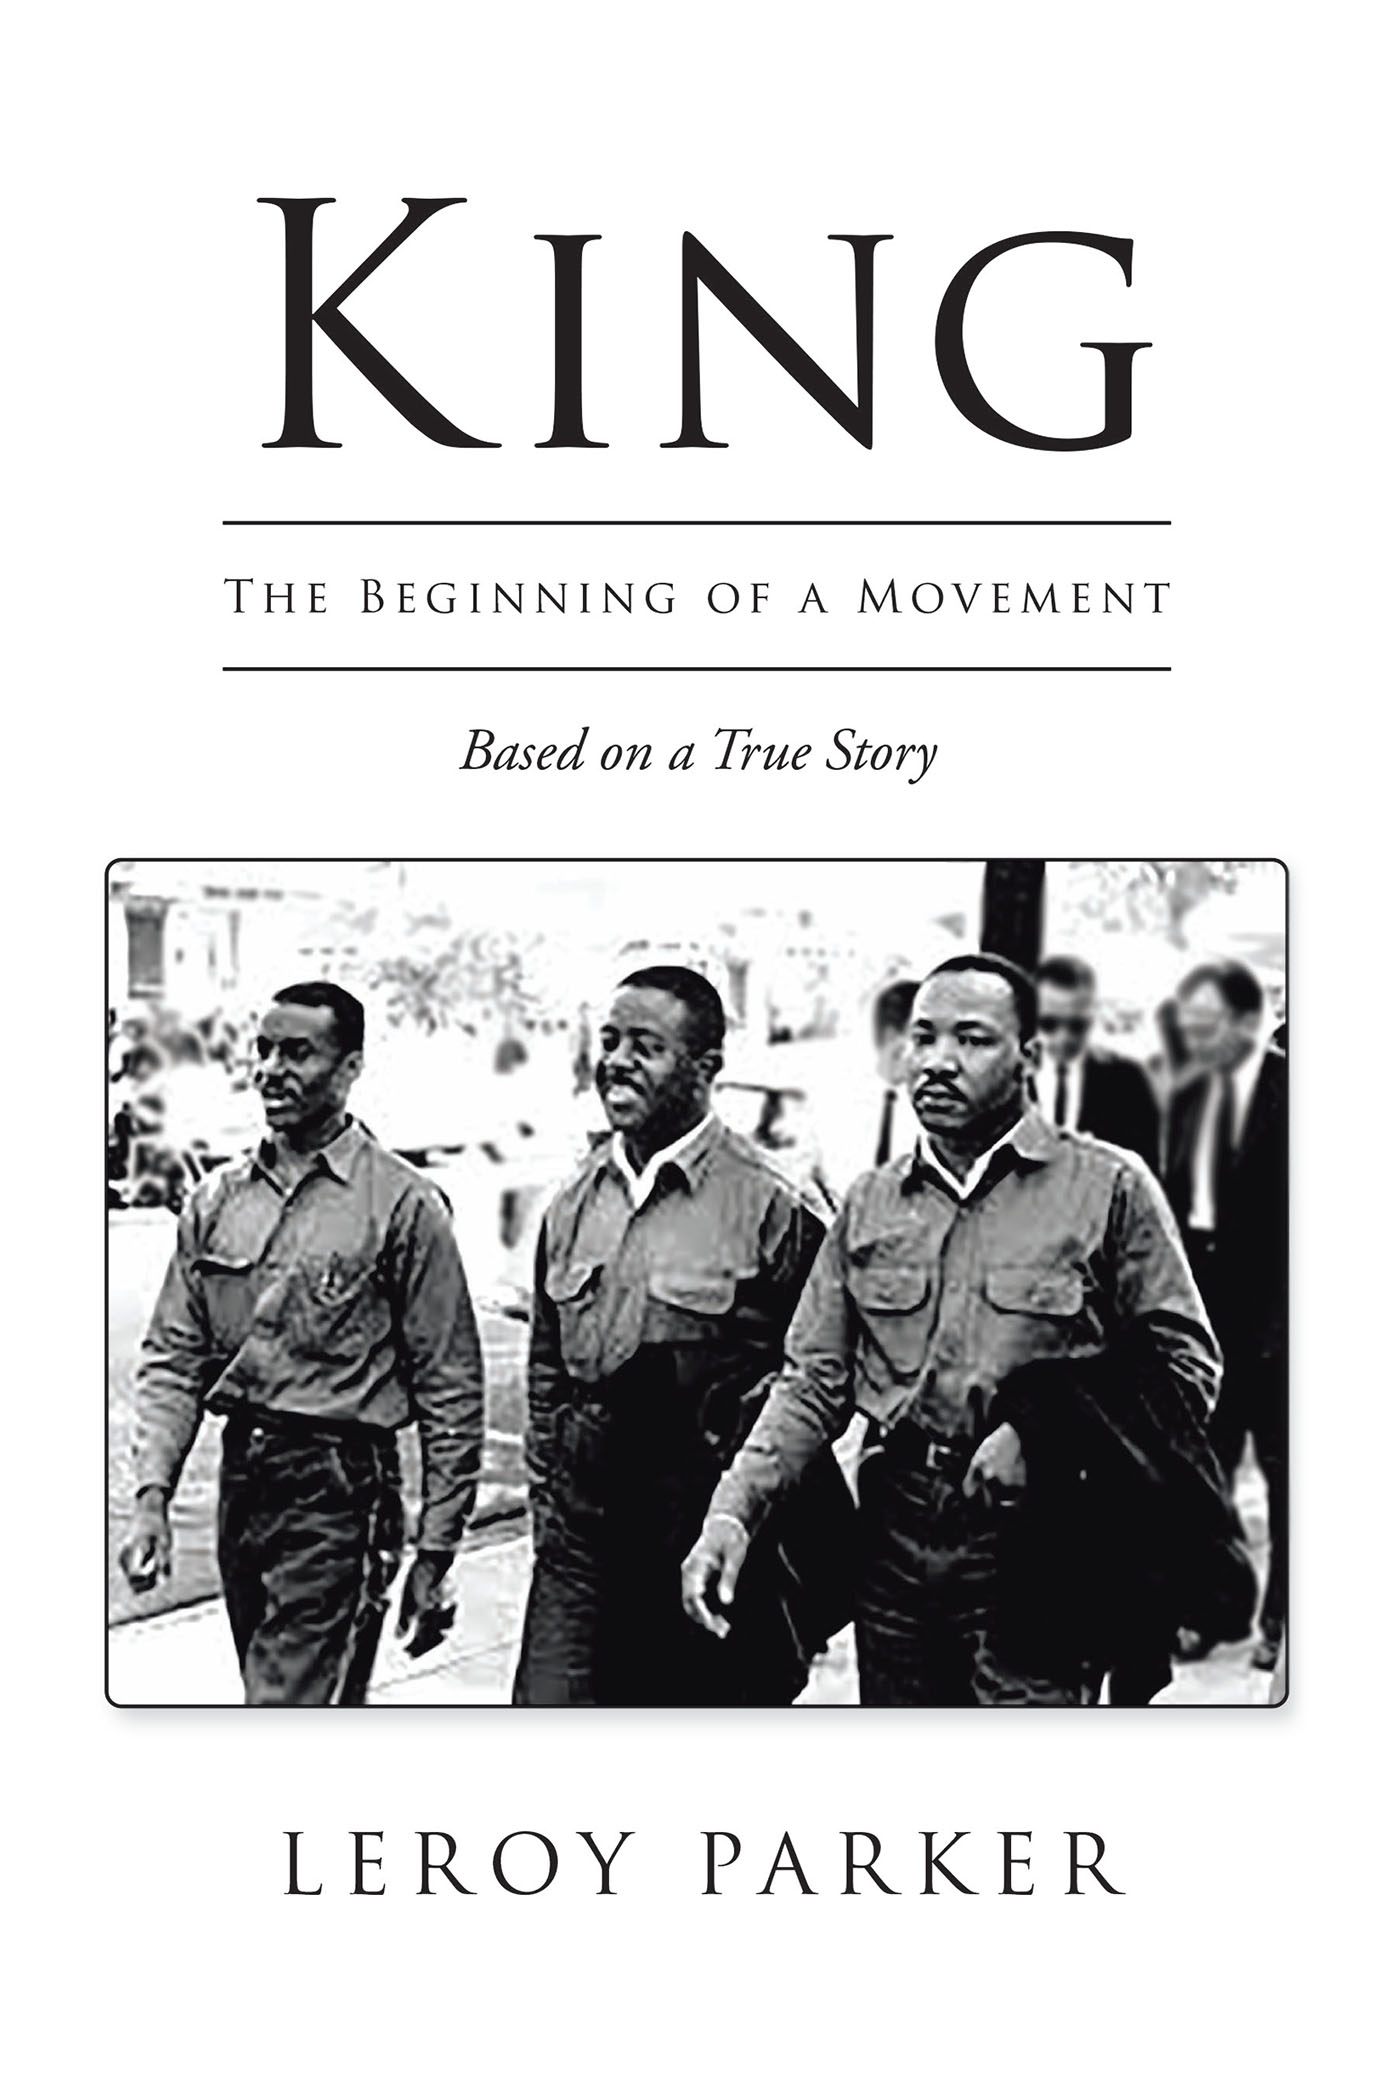 King Cover Image